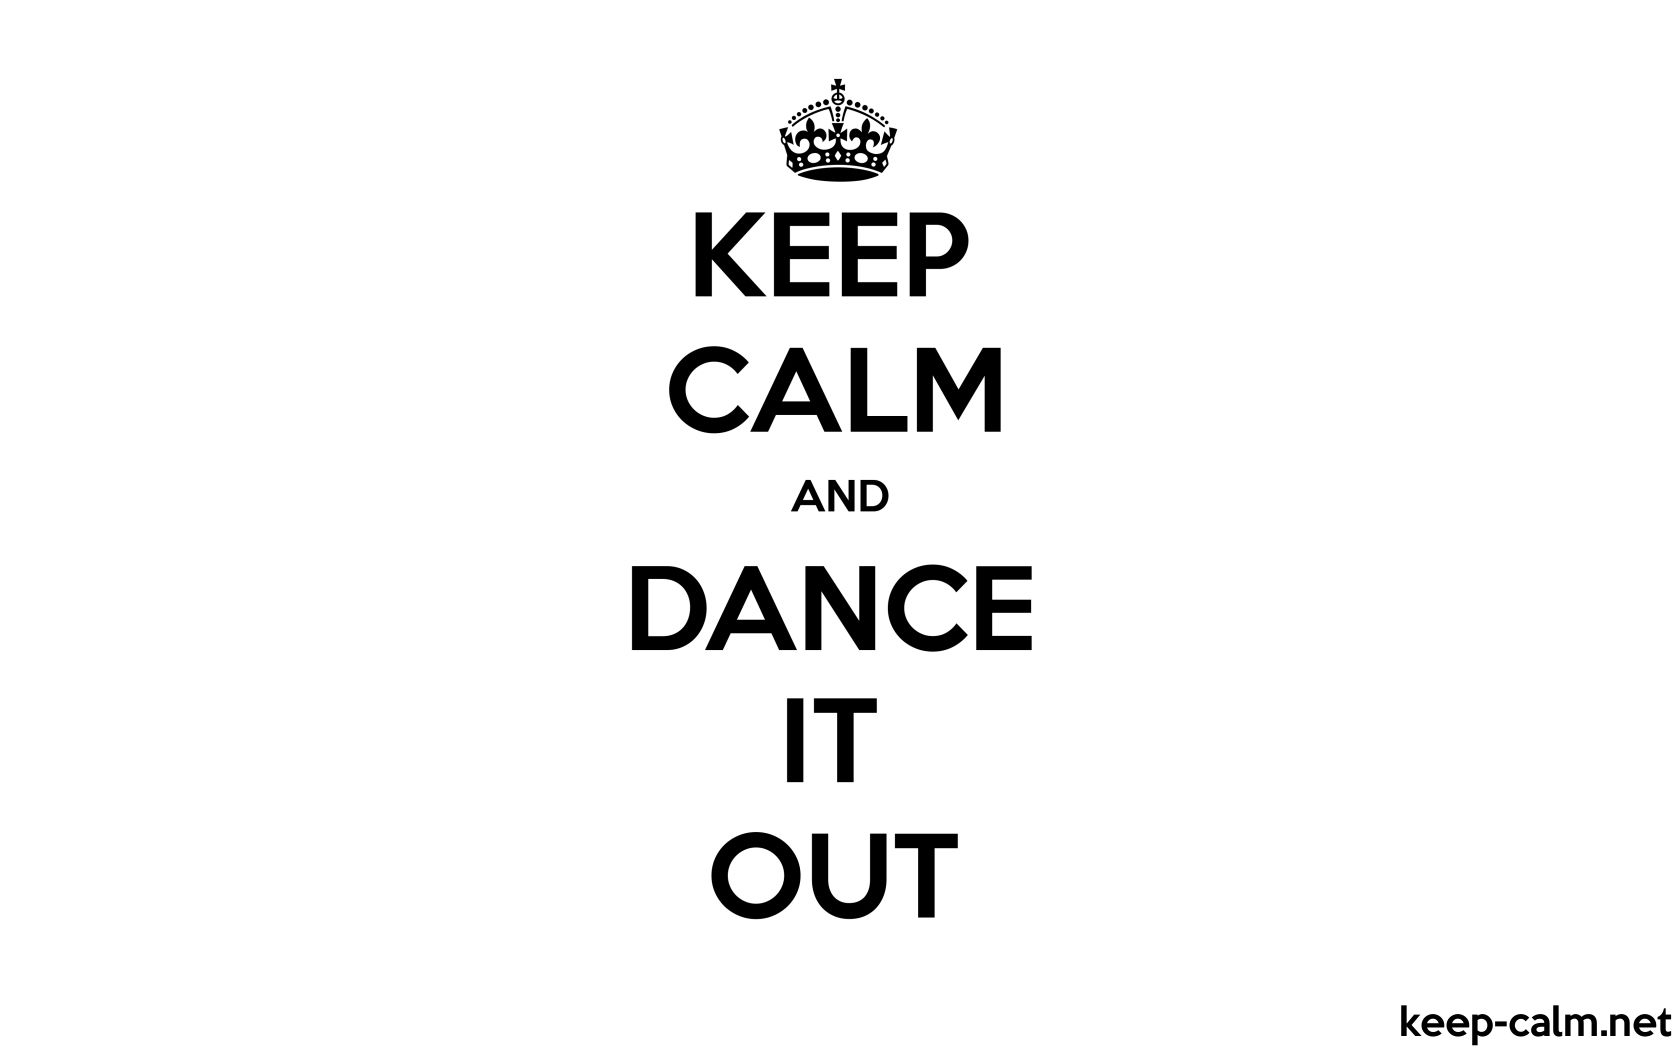 KEEP CALM AND DANCE IT OUT